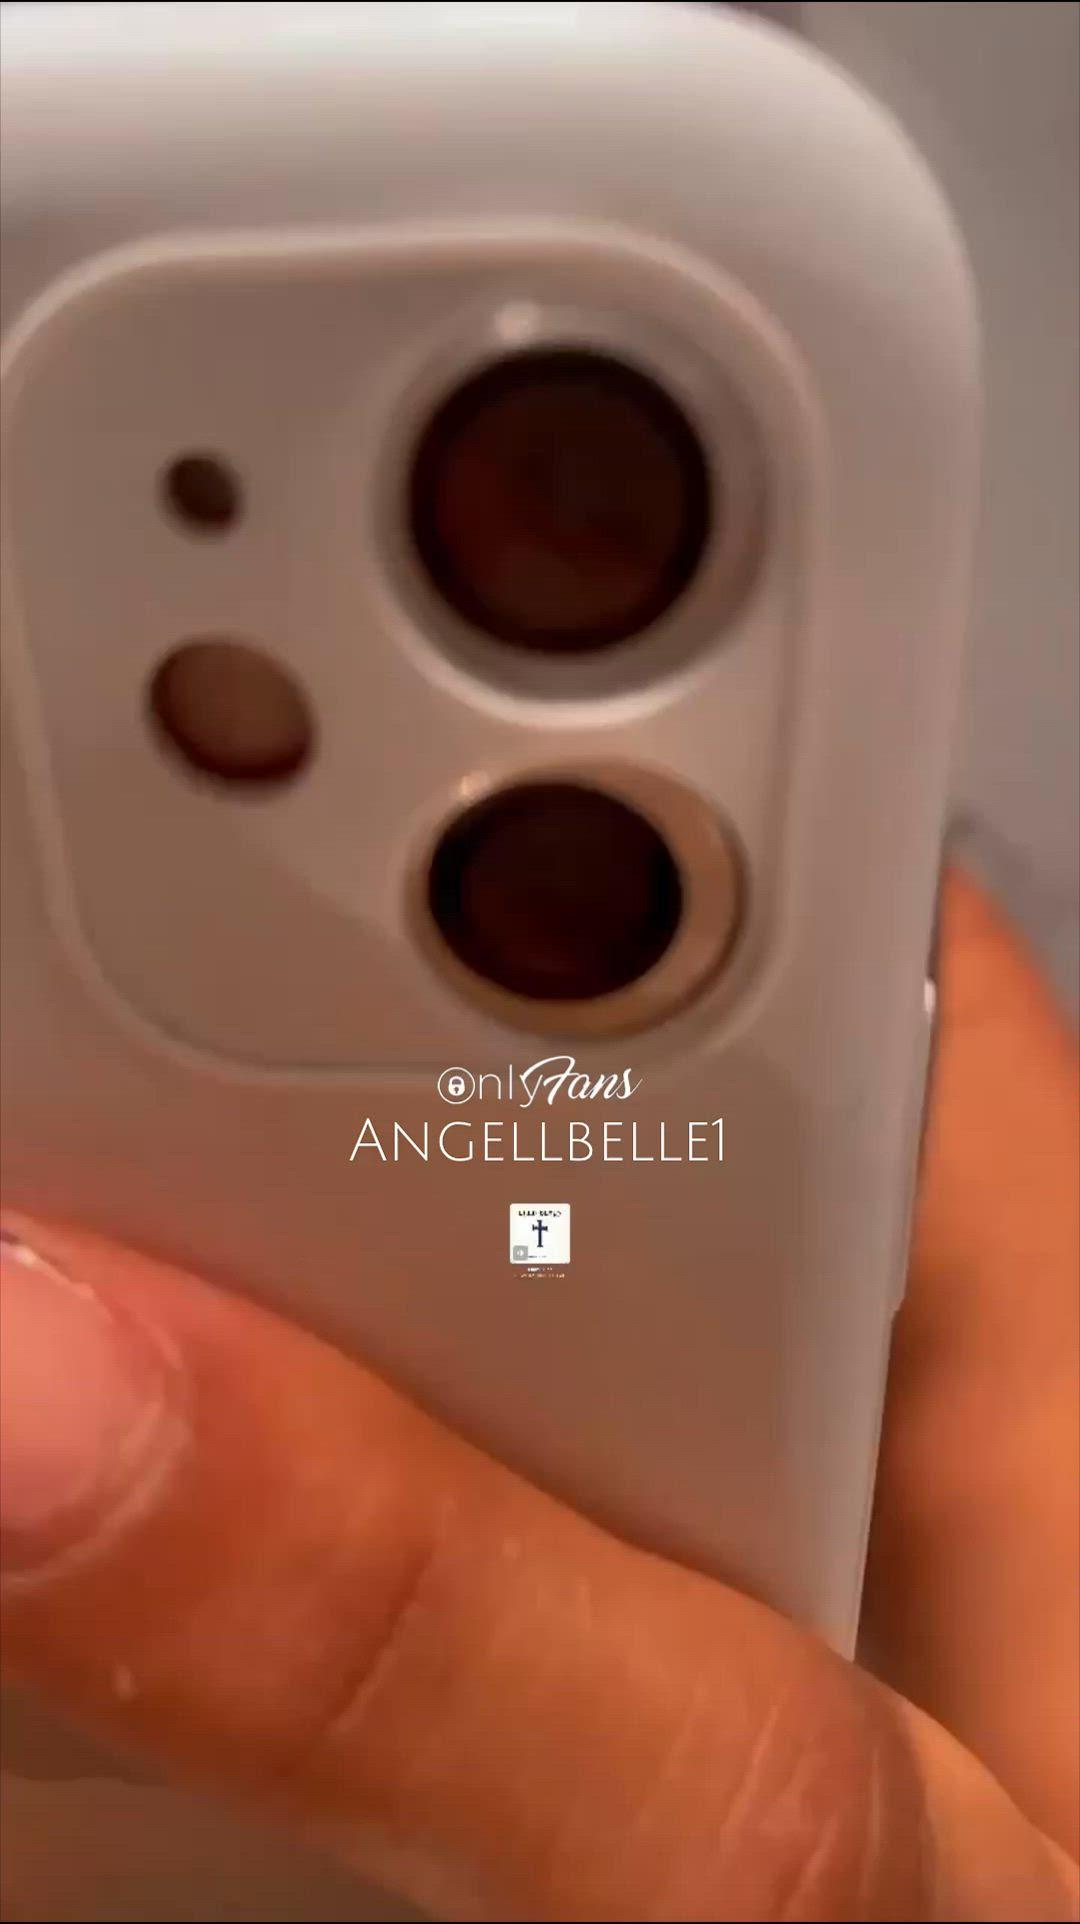 Amateur porn video with onlyfans model bigassangellbelle <strong>@angellbelle1</strong>